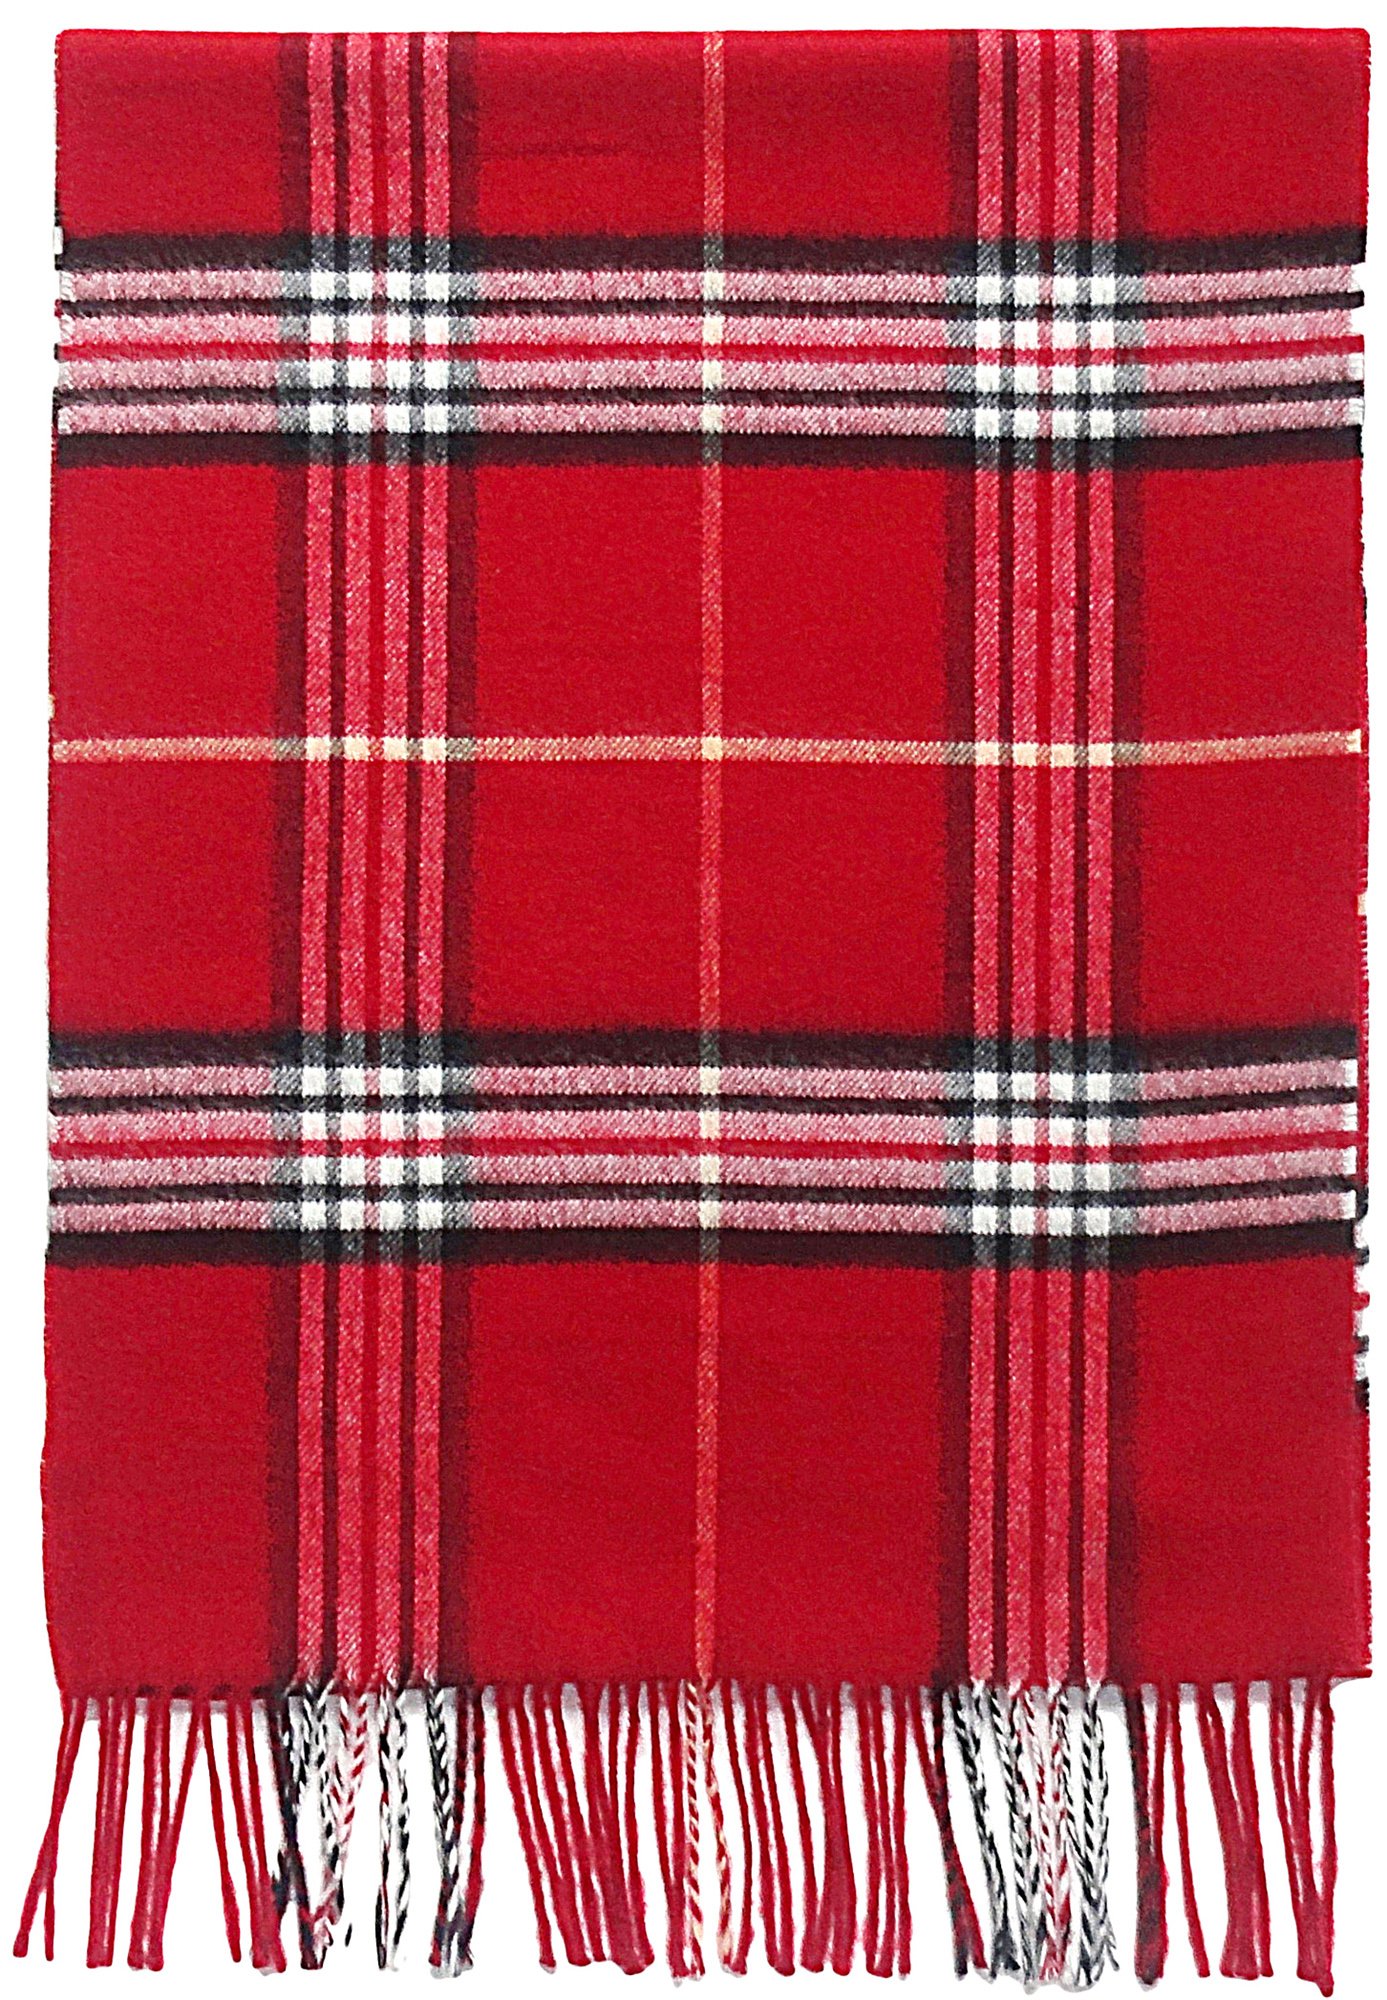 Fraas Plaid in Red- $35.00
Cashmink, Made in Germany
7718990809604
